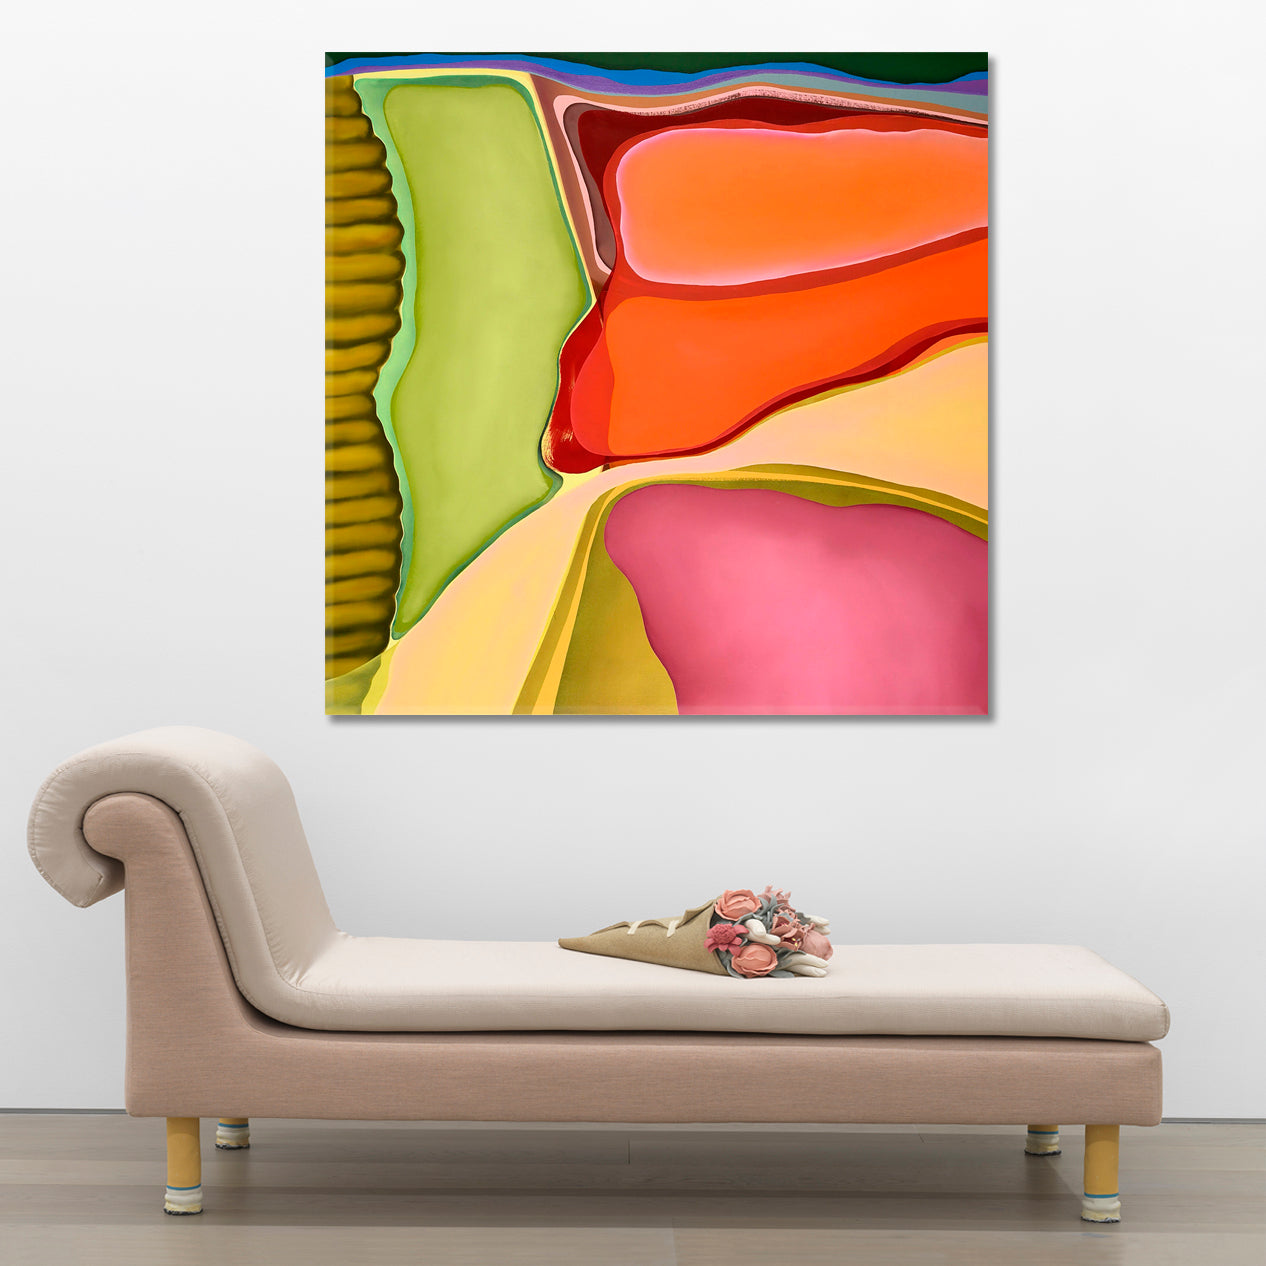 ABSTRACT Vibrant Swirling Multiple Layers Shapes Planes Composition Abstract Art Print Artesty 1 Panel 12"x12" 